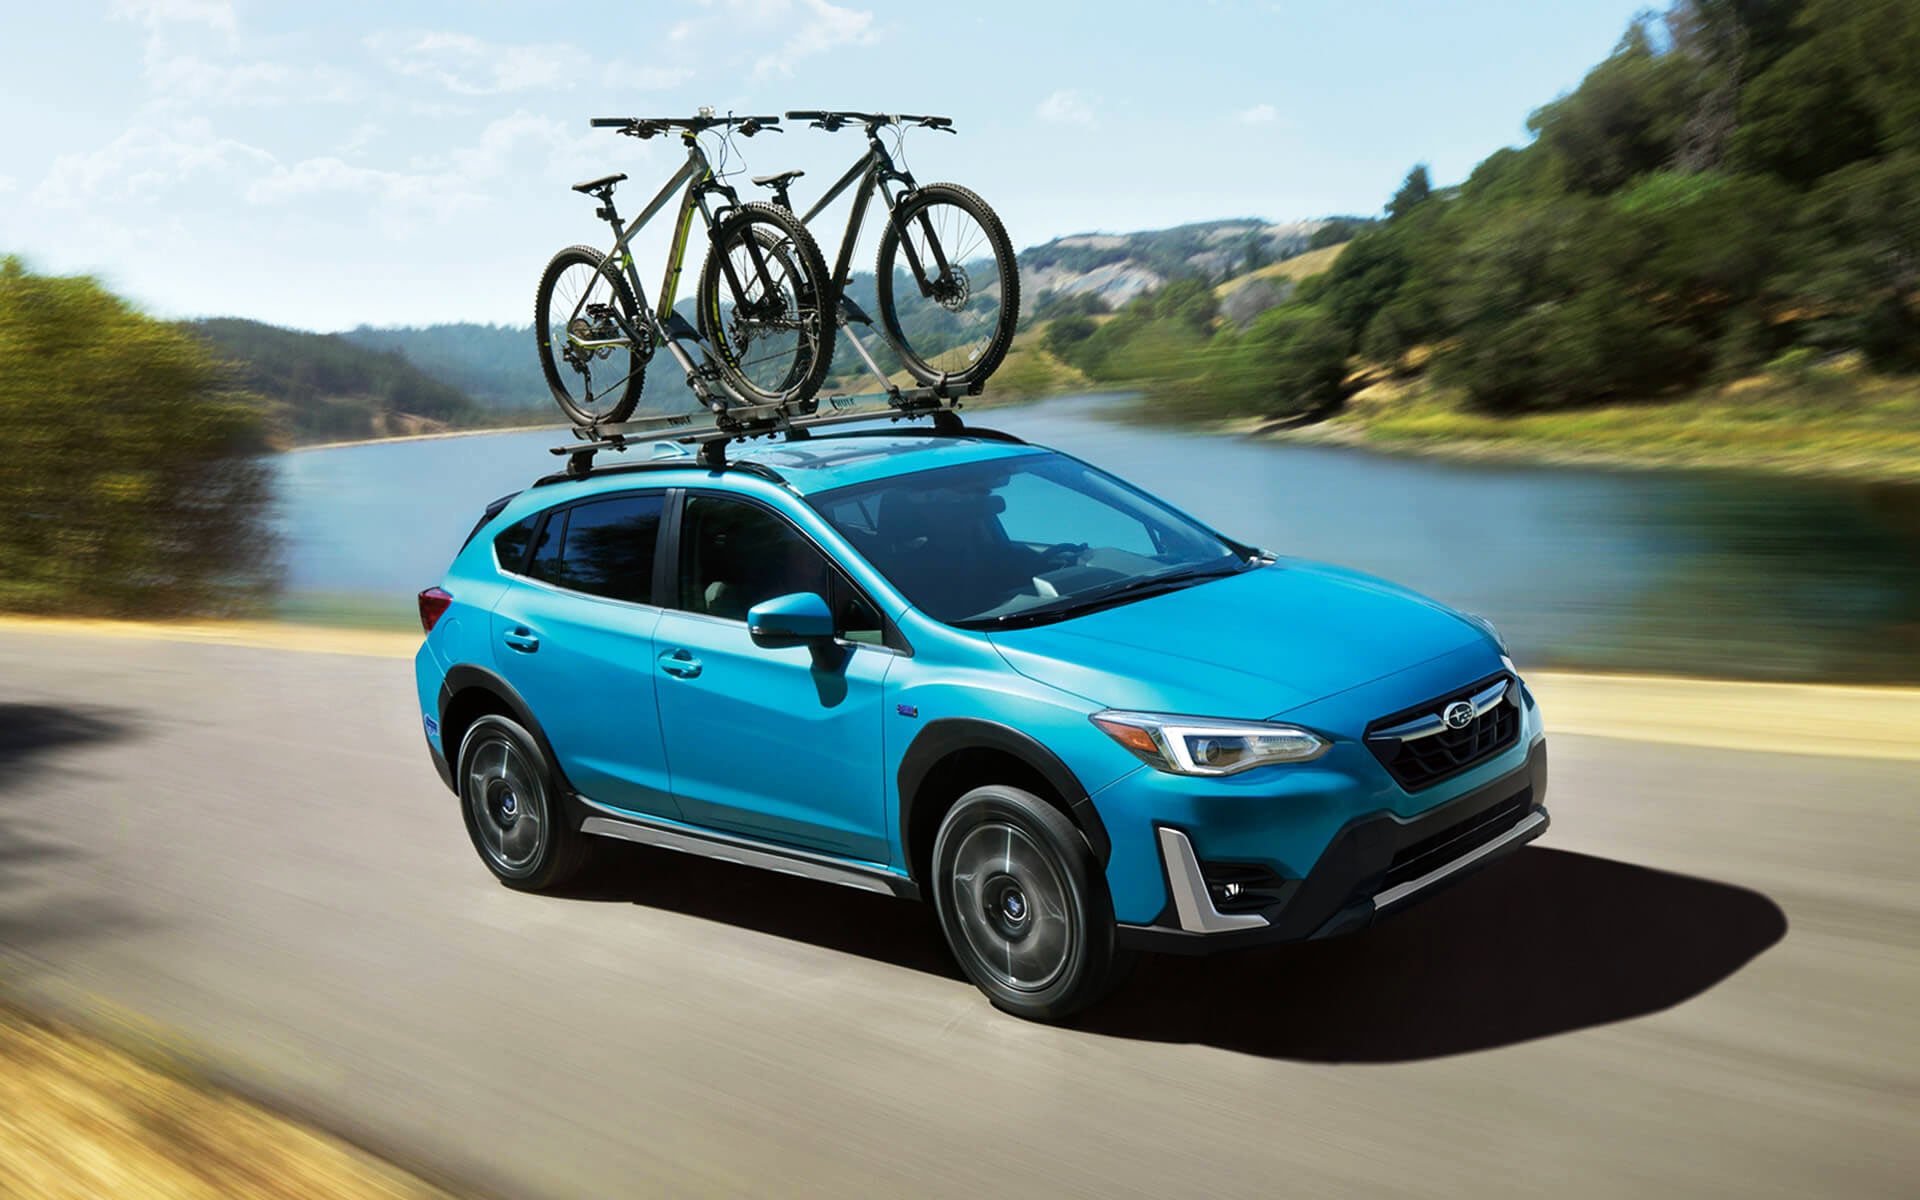 A blue Crosstrek Hybrid with two bicycles on its roof rack driving beside a river | Burke Subaru in Cape May Court House NJ